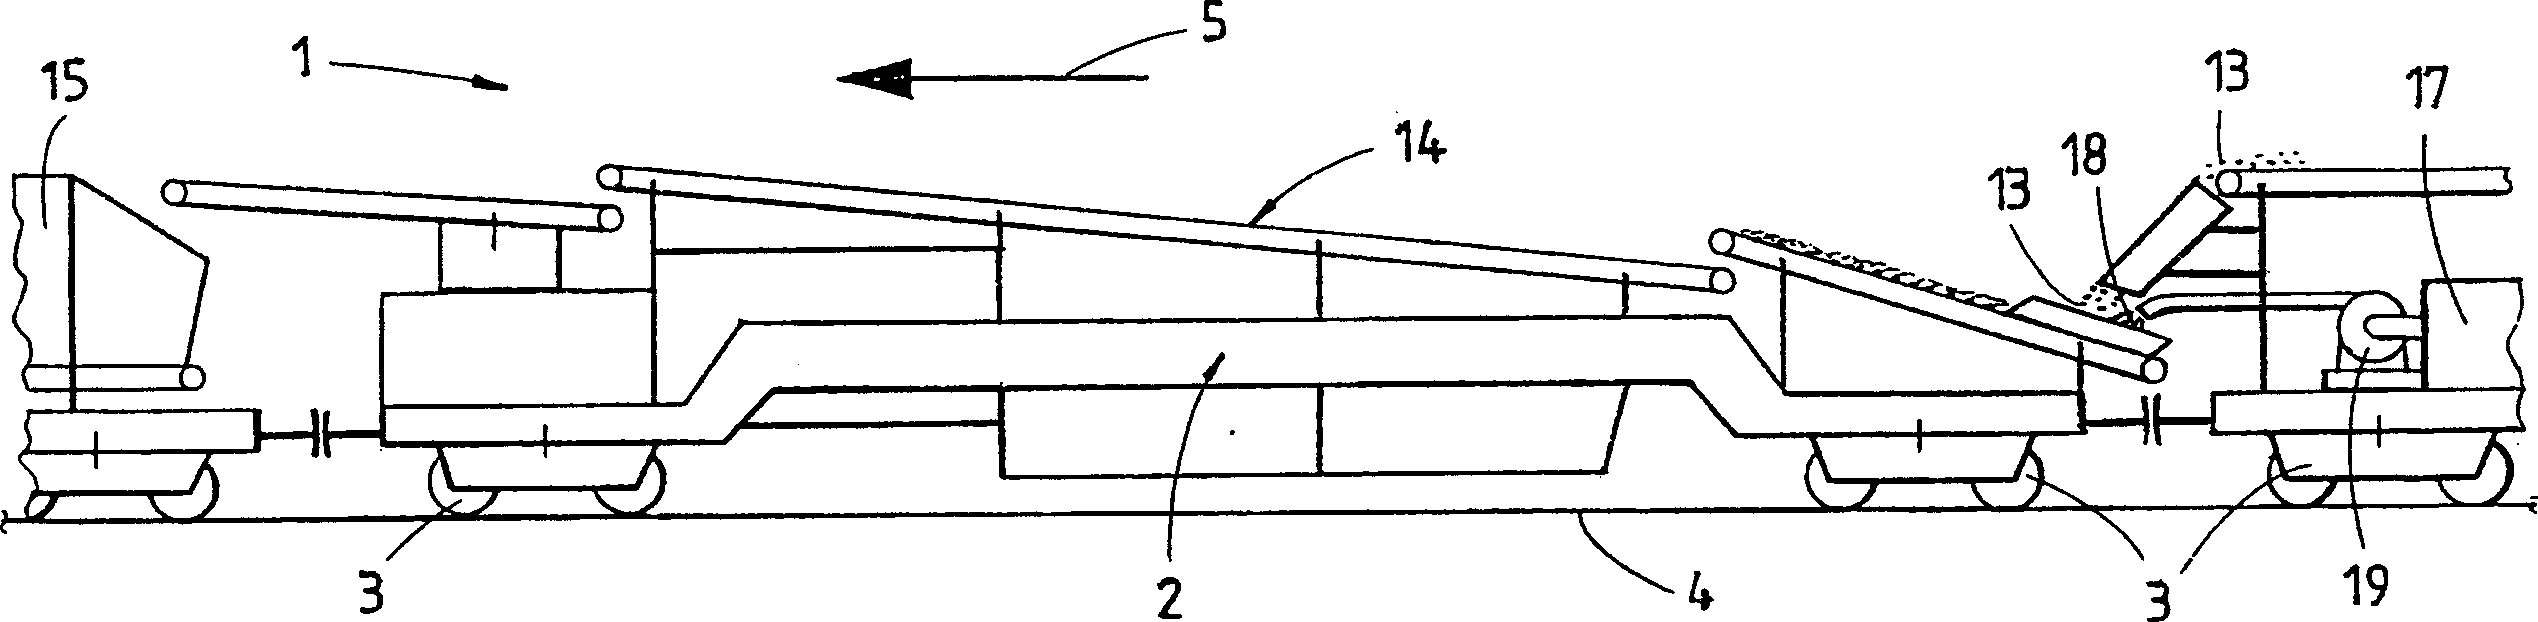 Method for cleaning track and ballast